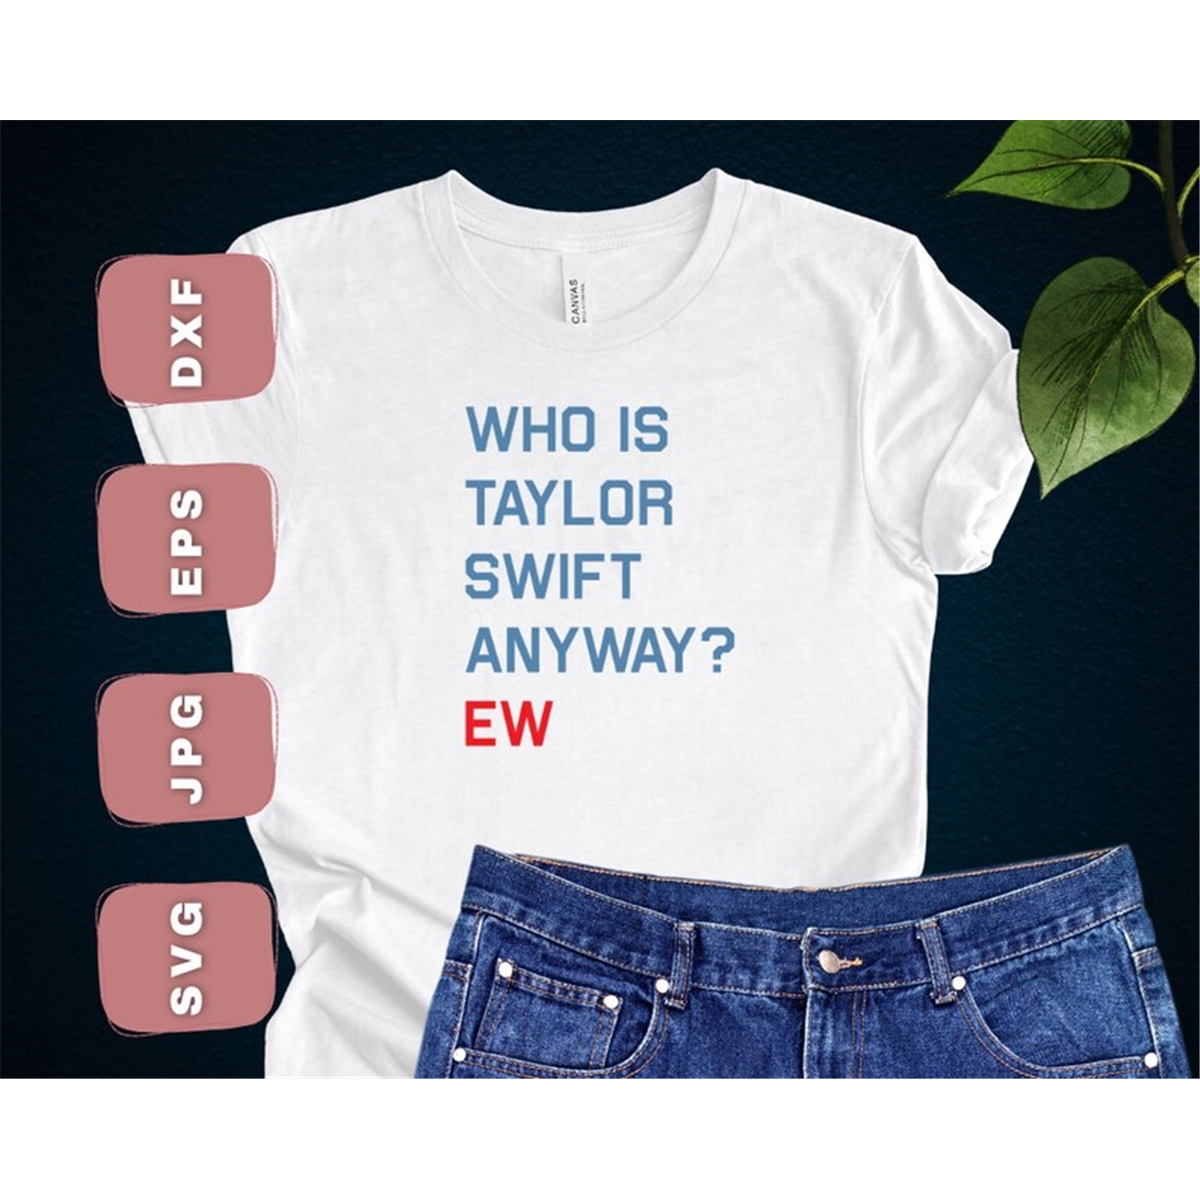 who-is-taylor-swift-svg-files-for-shirts-taylor-swift-cricut-image-1